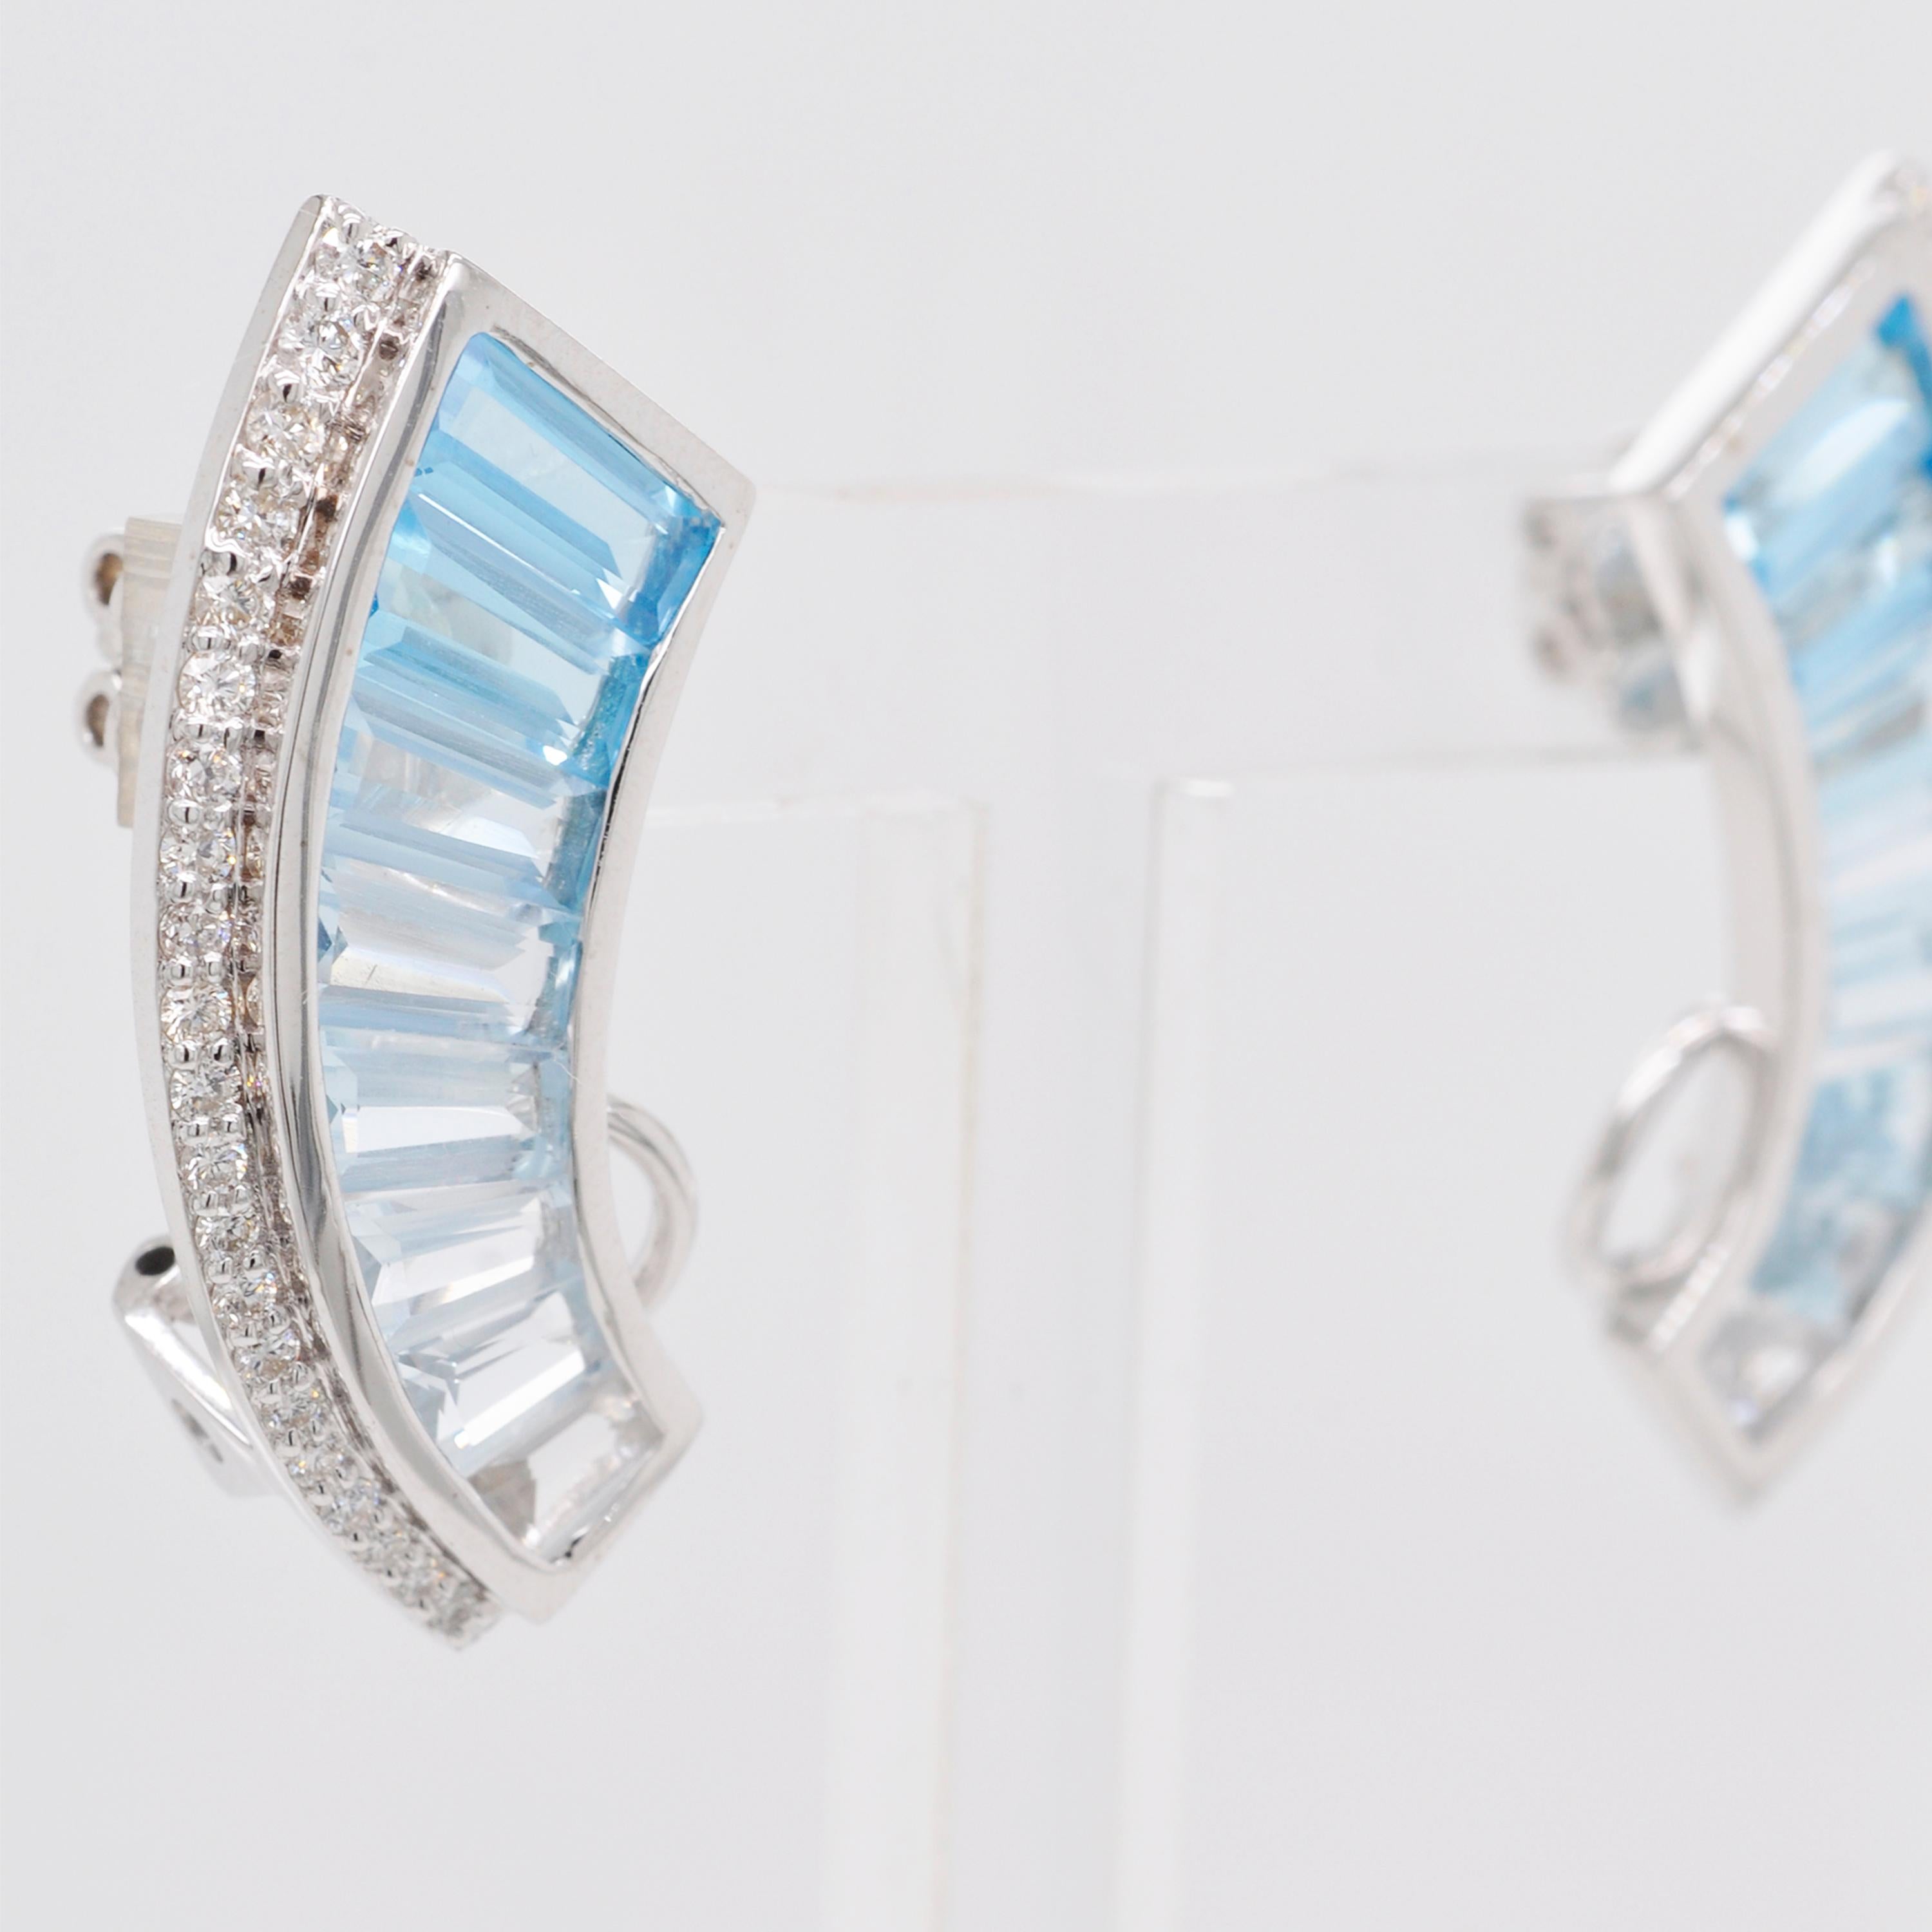 18 Karat White Gold Blue Topaz Diamond Ear-Climbers Stud Earrings In New Condition For Sale In Jaipur, Rajasthan